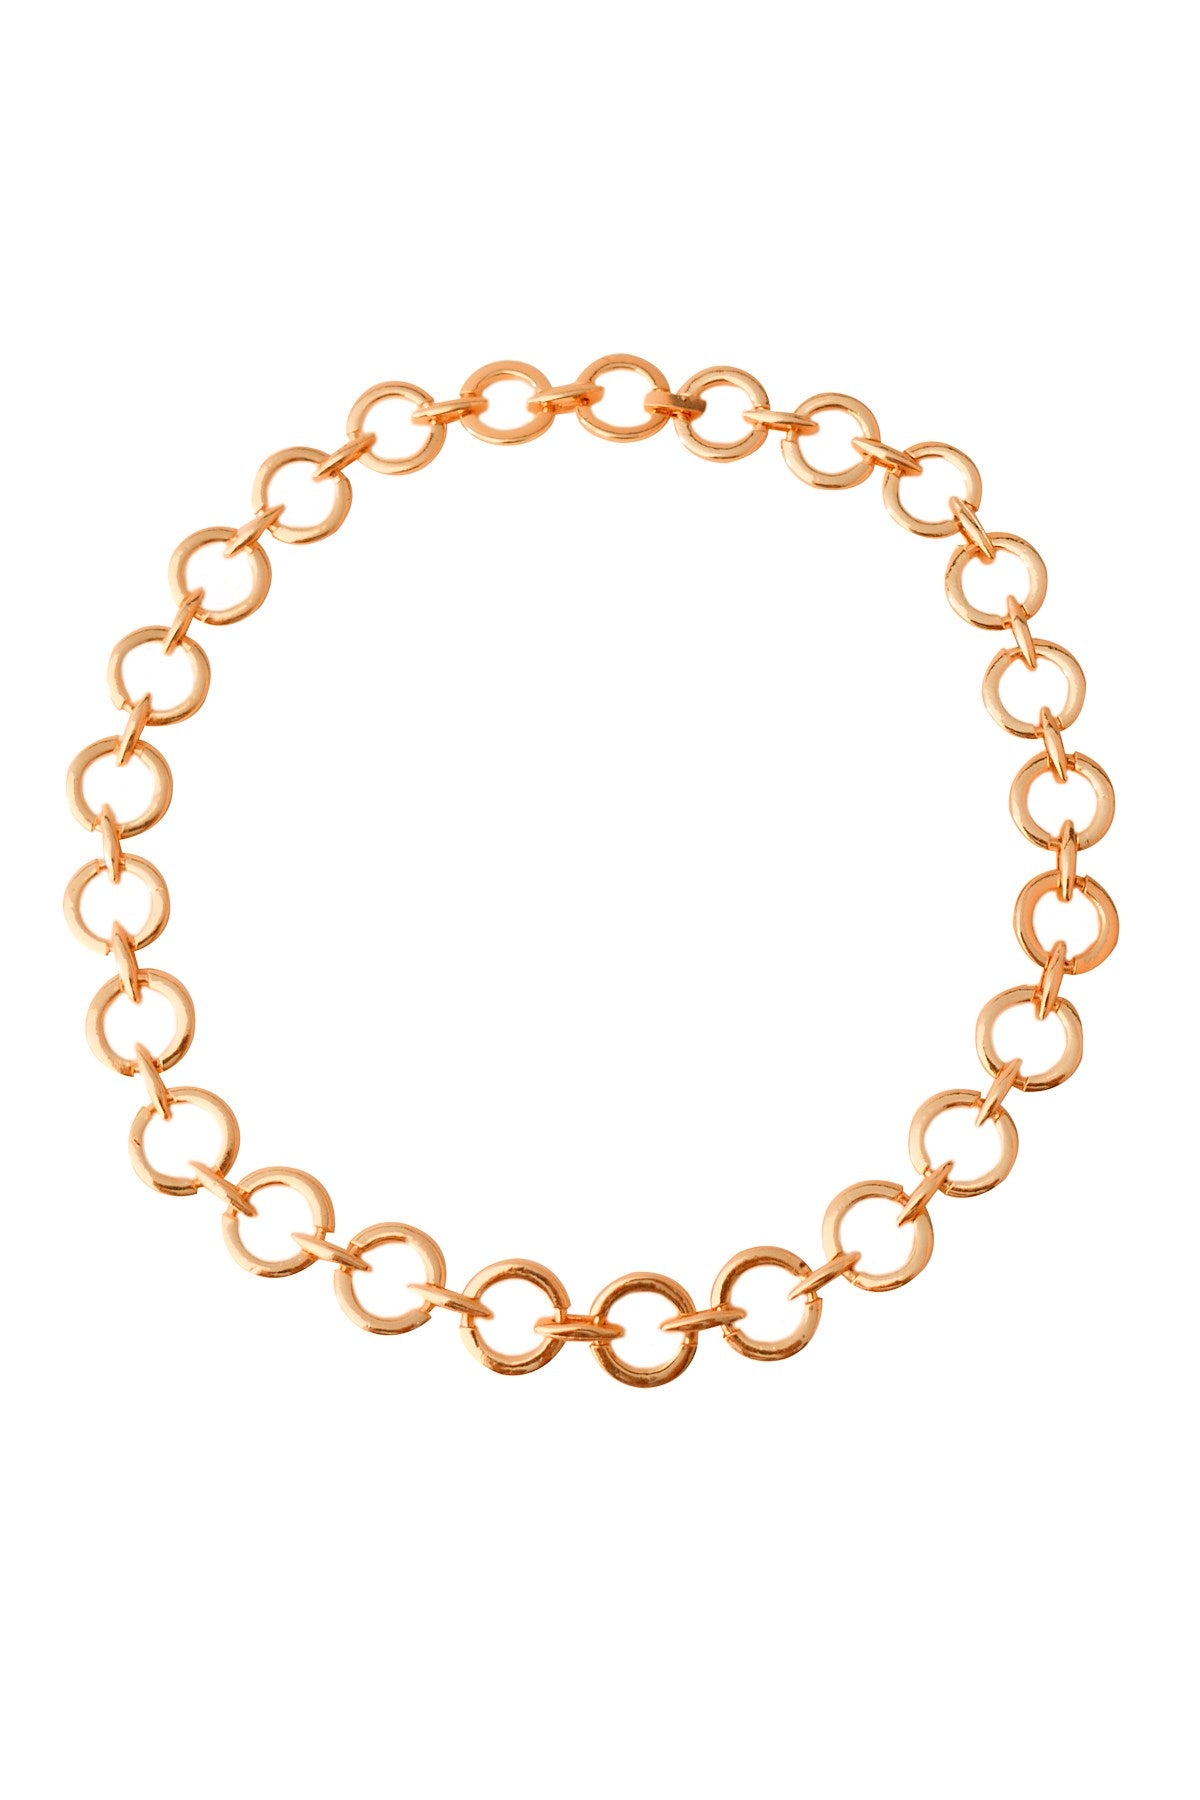 Circle Ring Choker Necklace Gold Plated